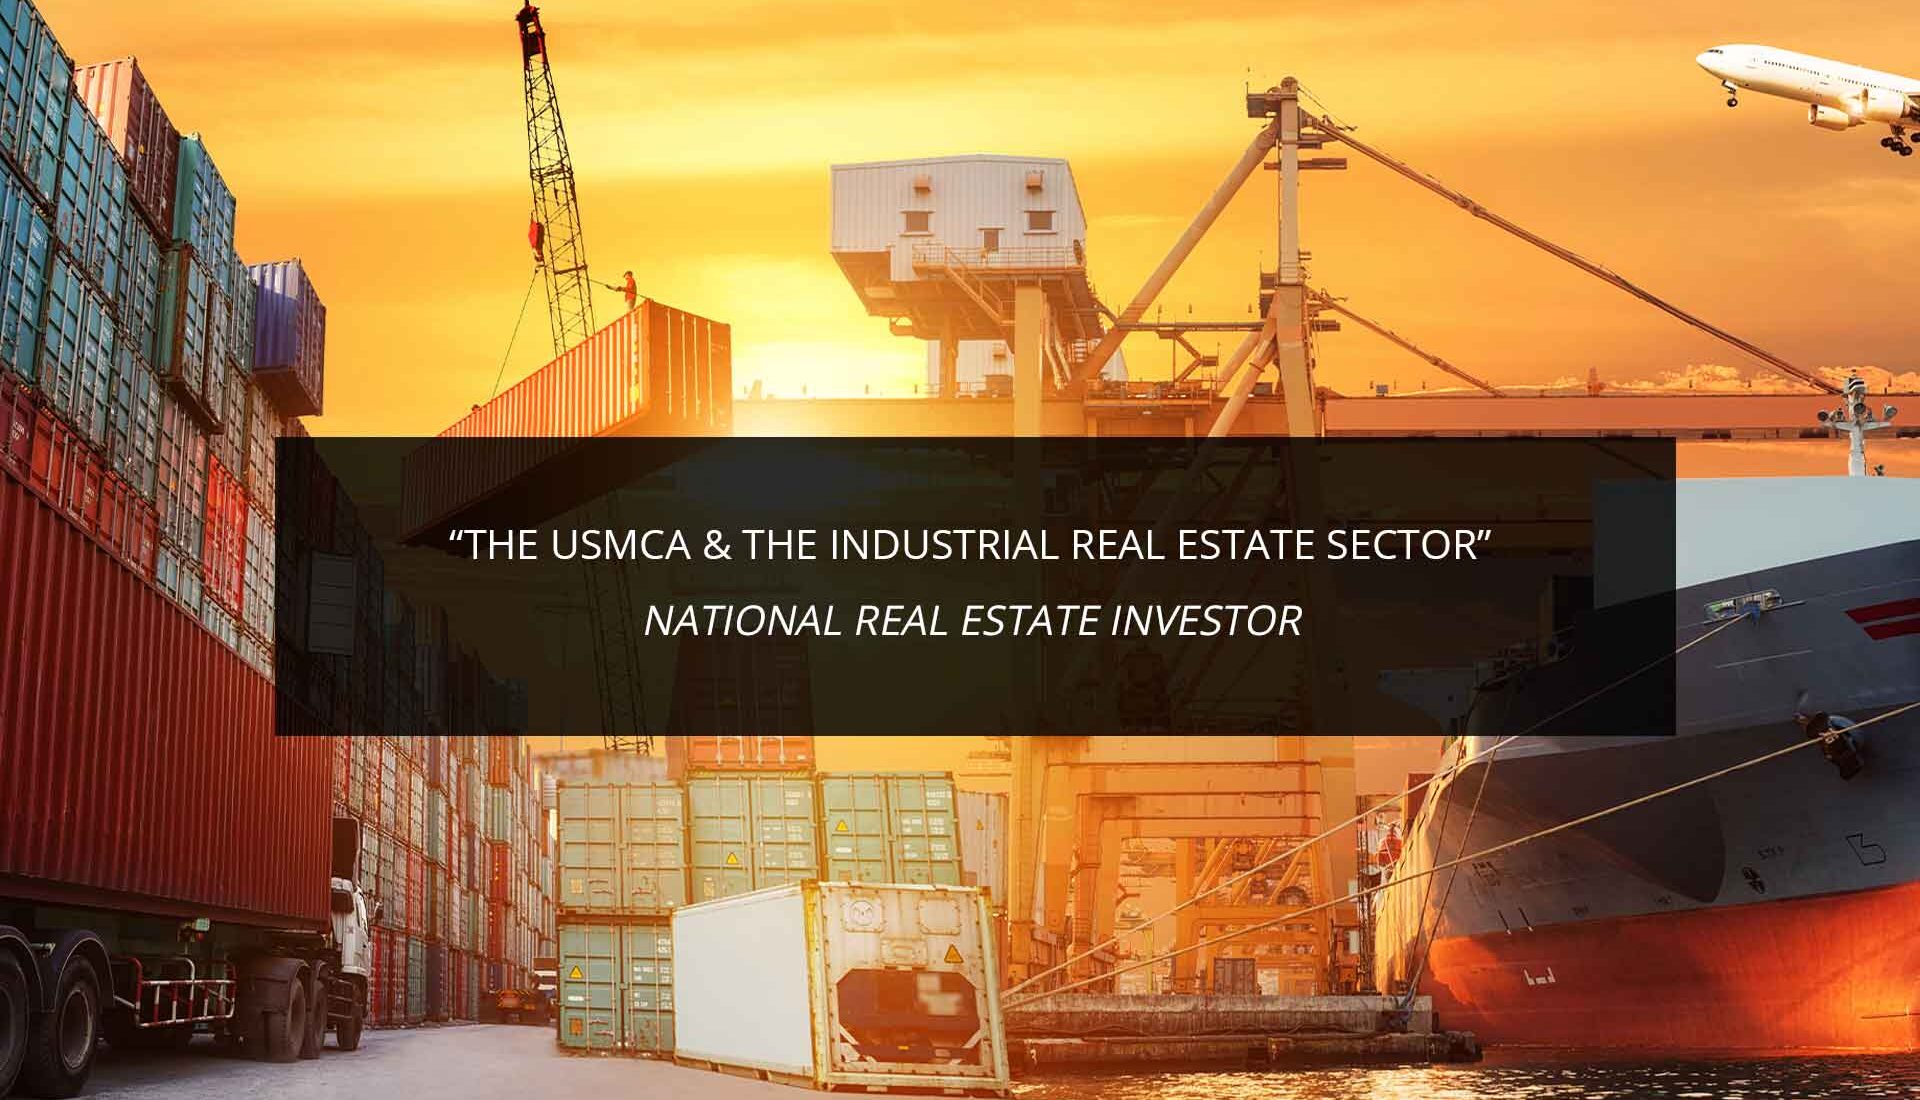 The USMCA & the Industrial Real Estate Sector